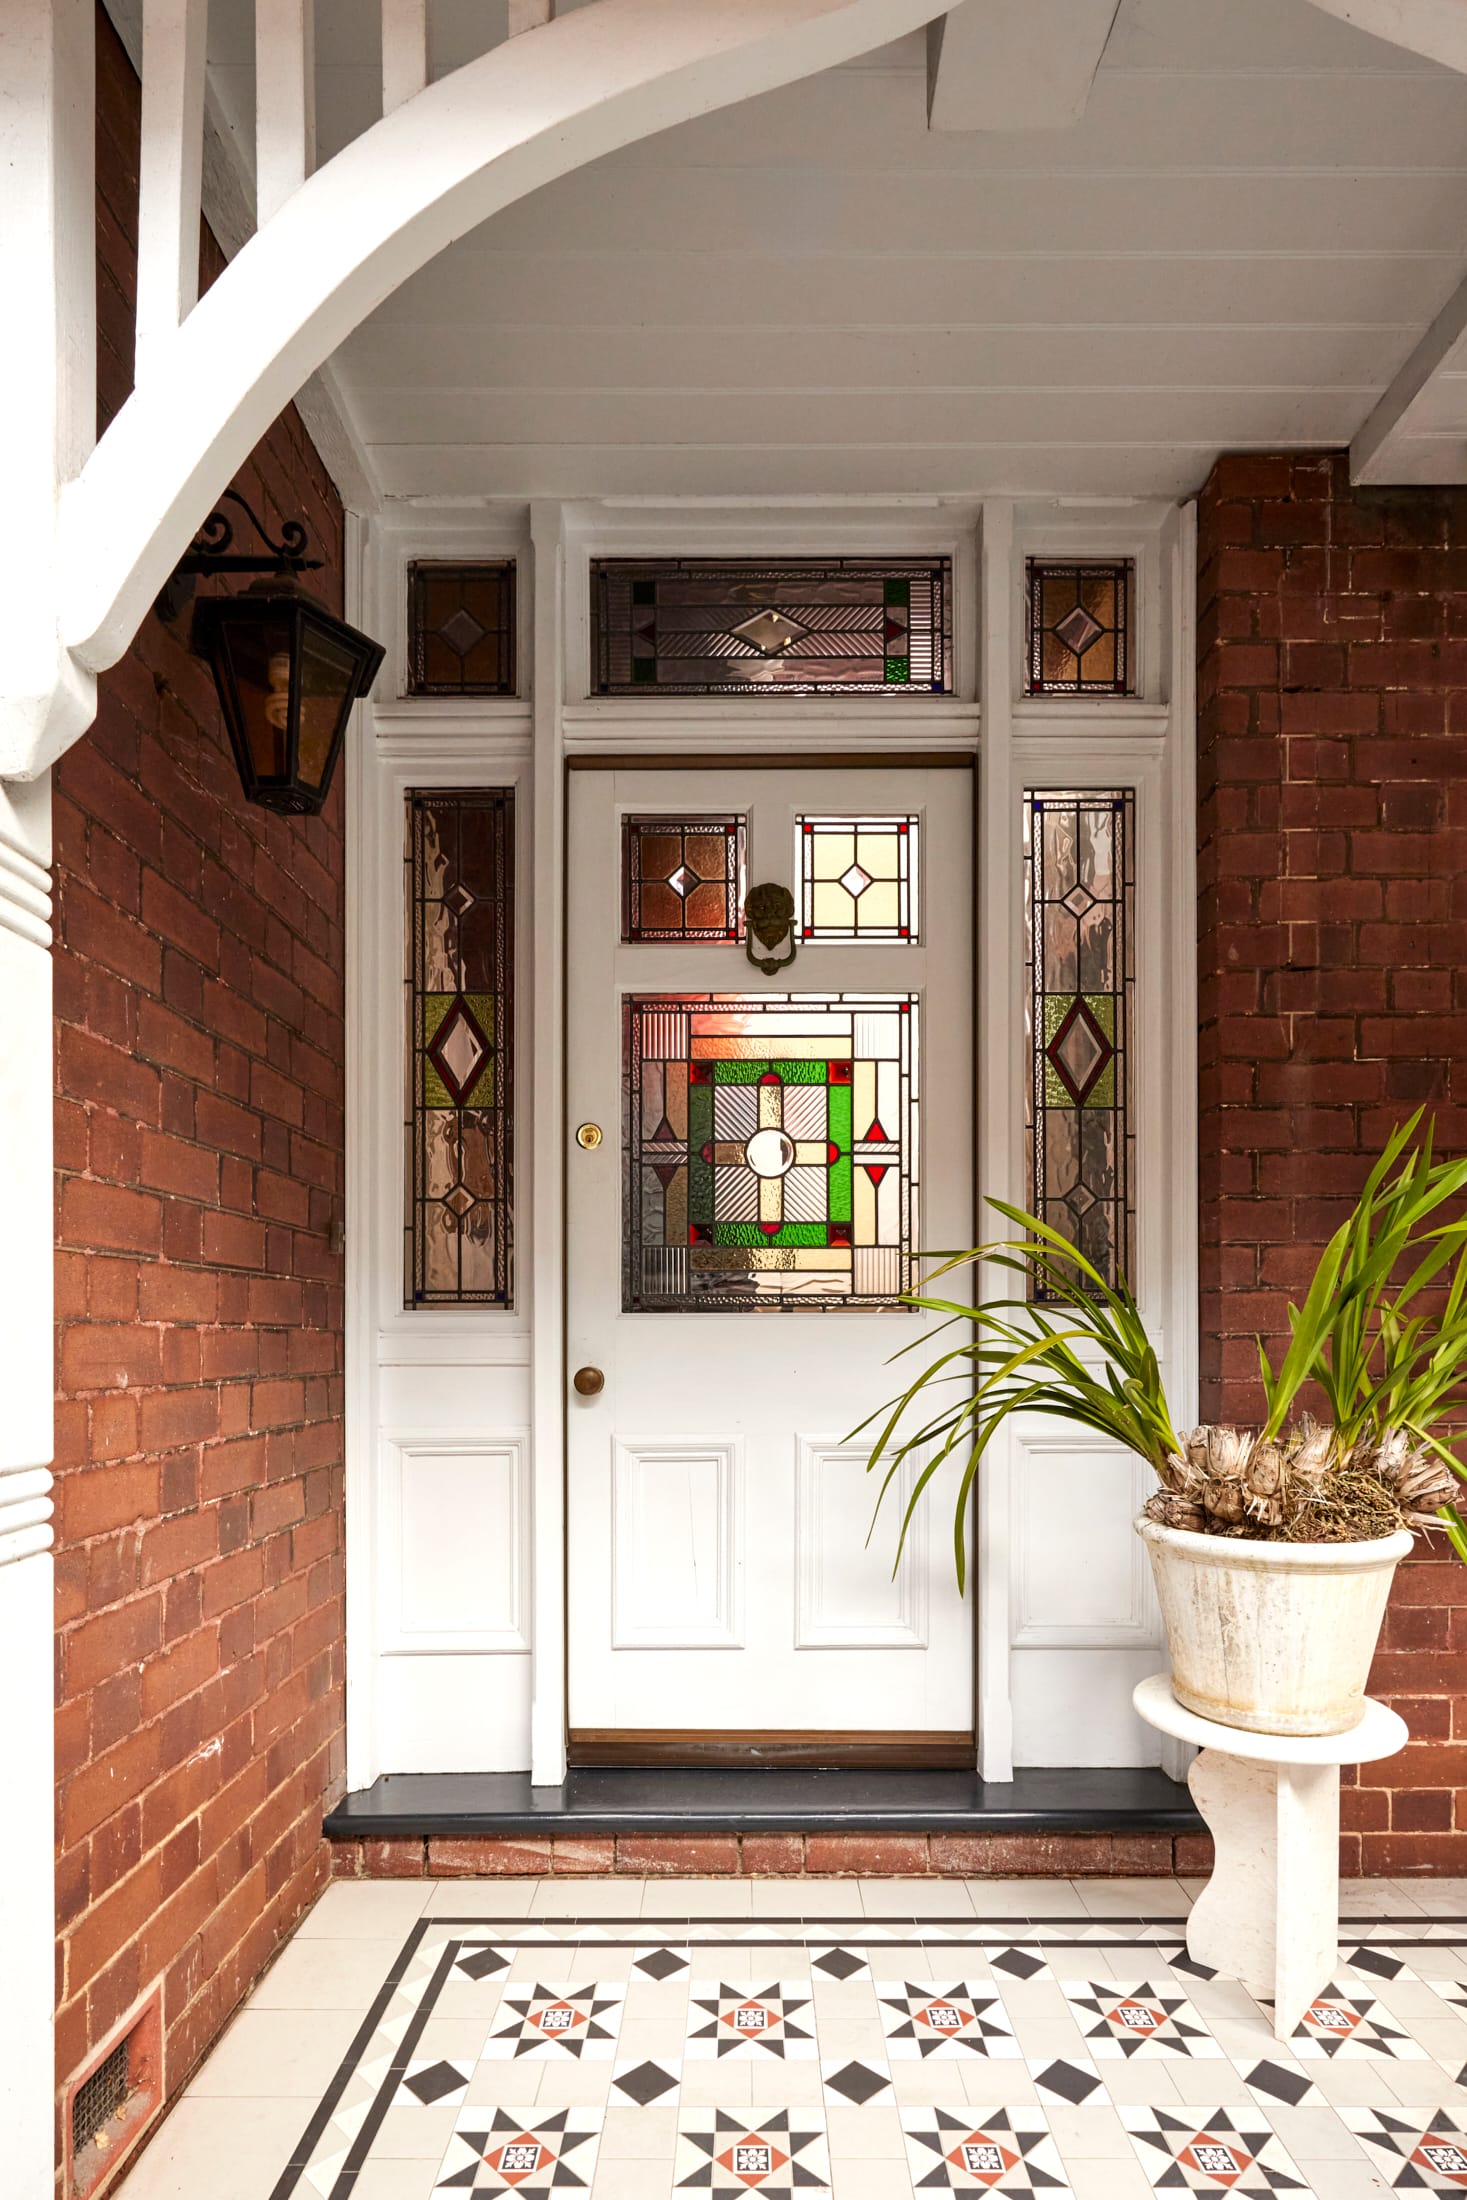 Drummoyne House by studio BARBARA. Photography by Jacqui Turk. White front door with stained glass details and heritage floor tiling. Red brick facade.